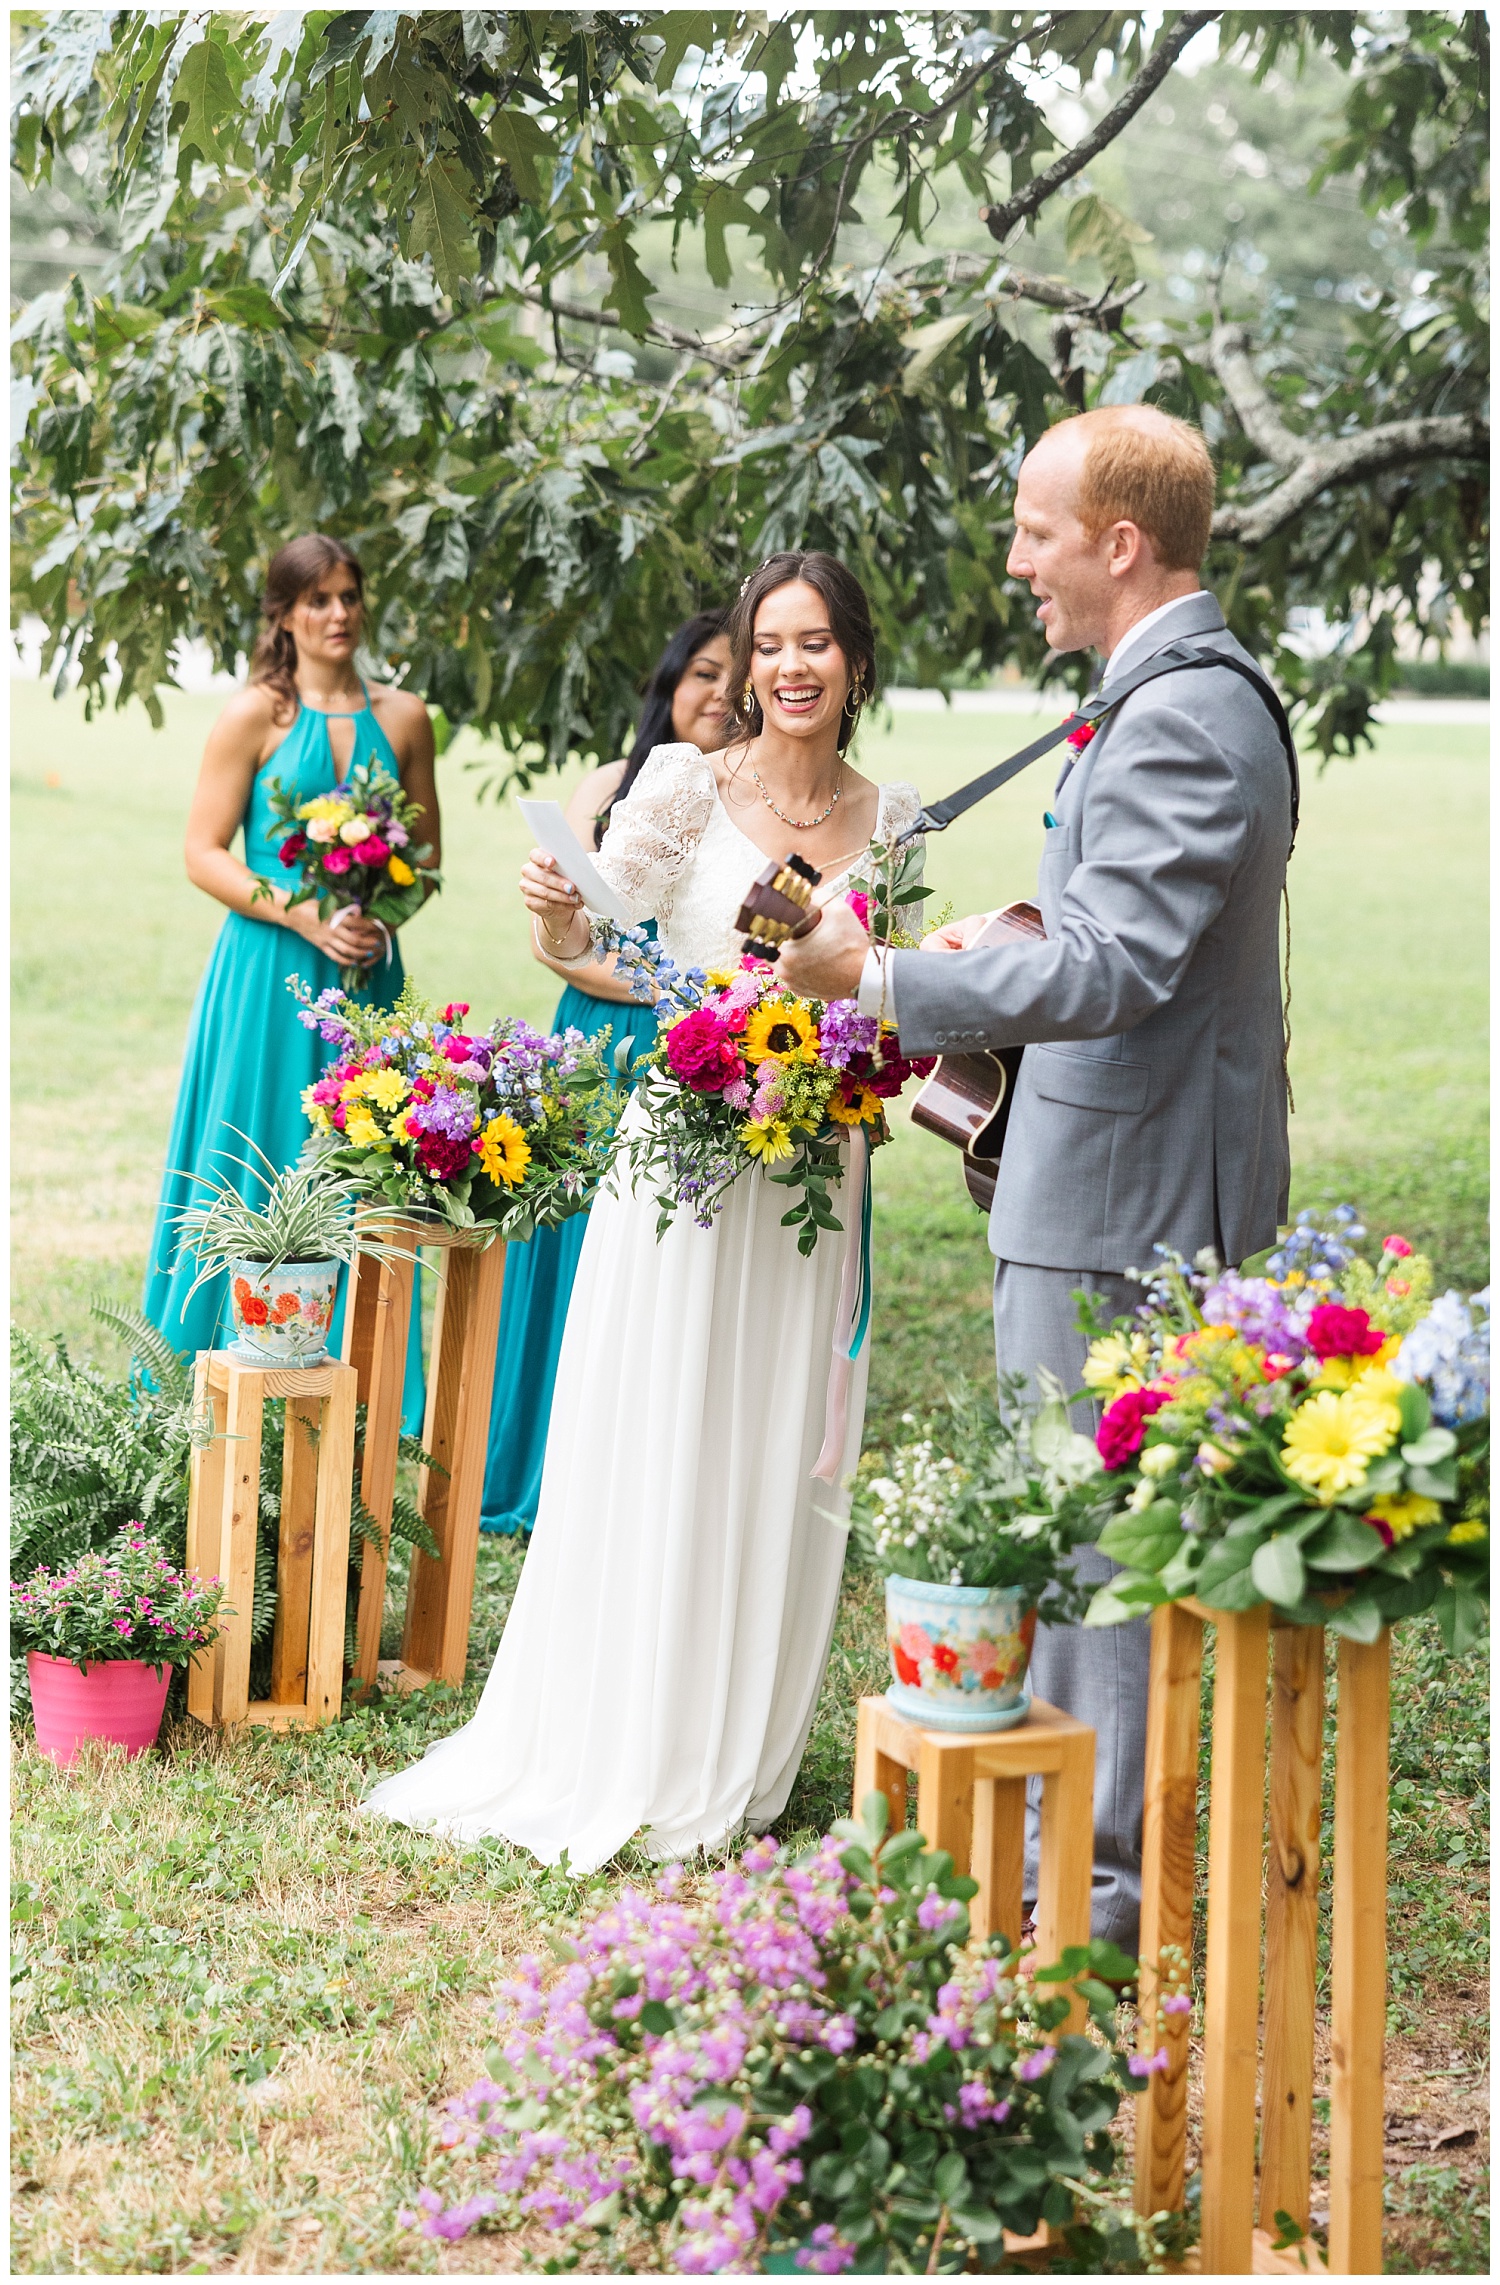 bride holding up the lyrics while the groom plays guitar at wedding ceremony